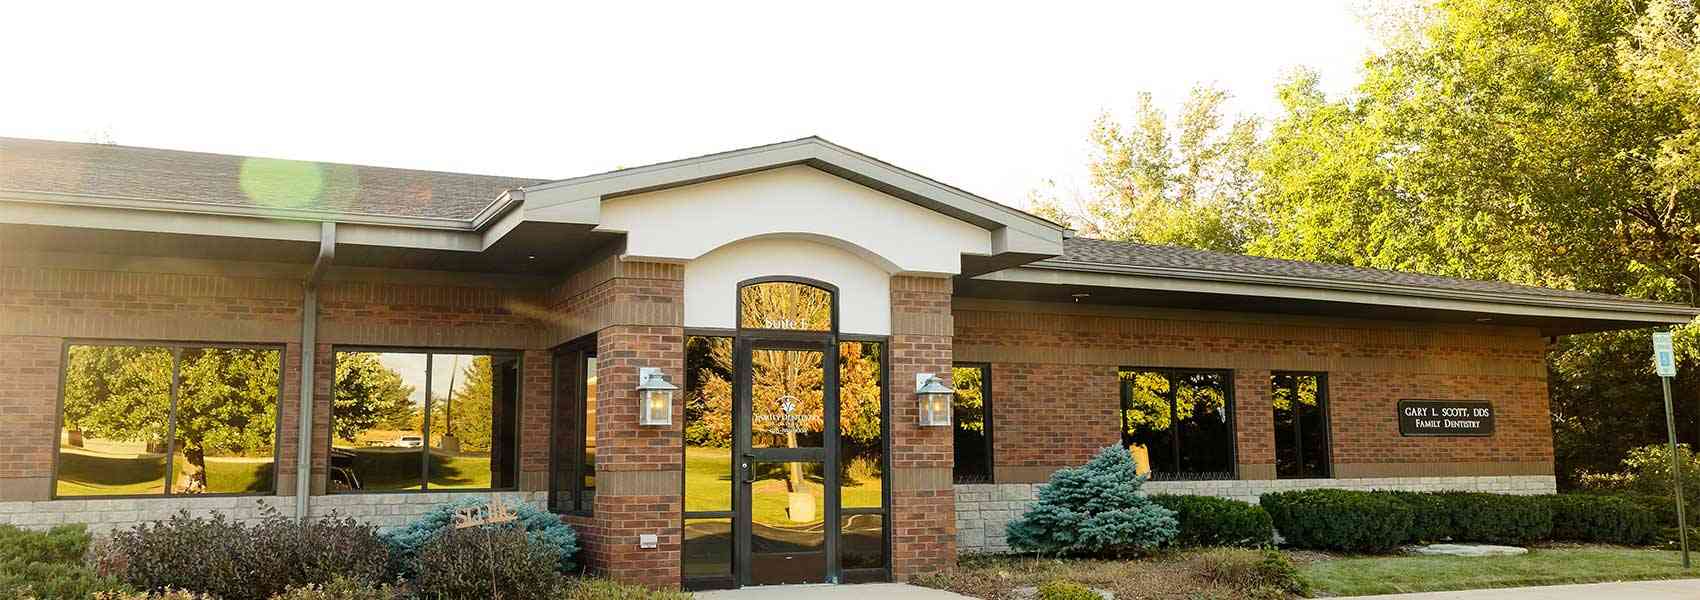 Family Dentistry of Caledonia's office front view